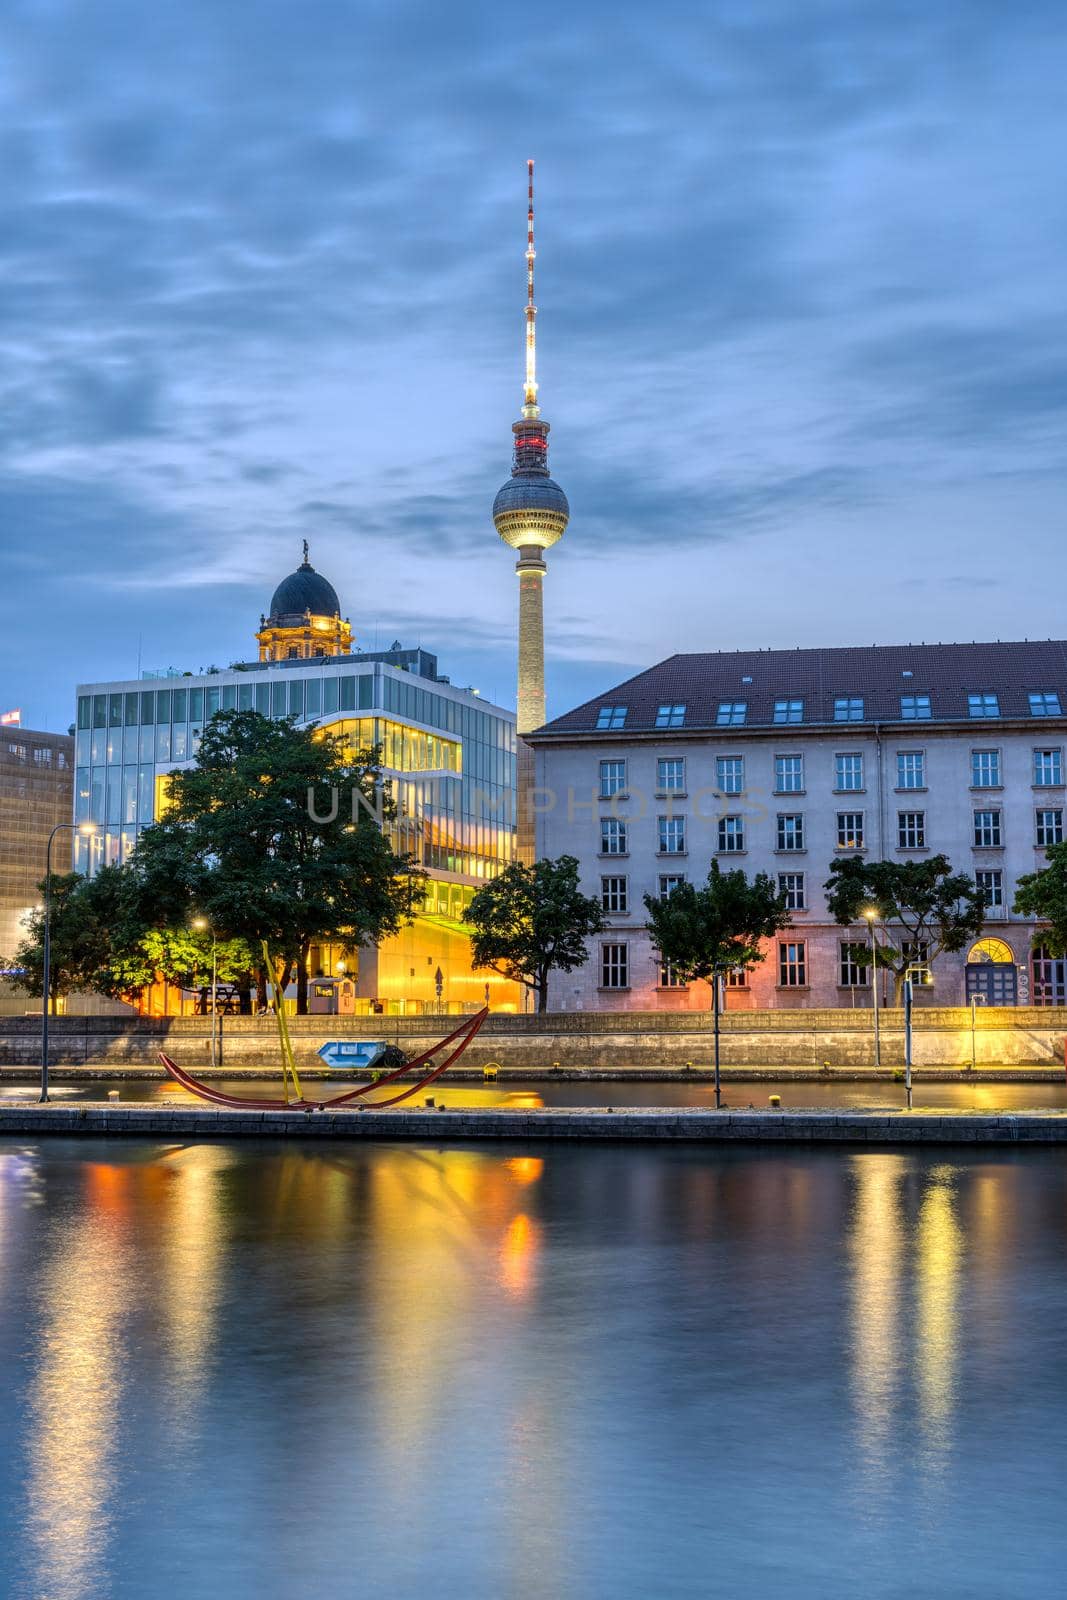 The river Spree in downtown Berlin with the famous TV Tower before sunrise